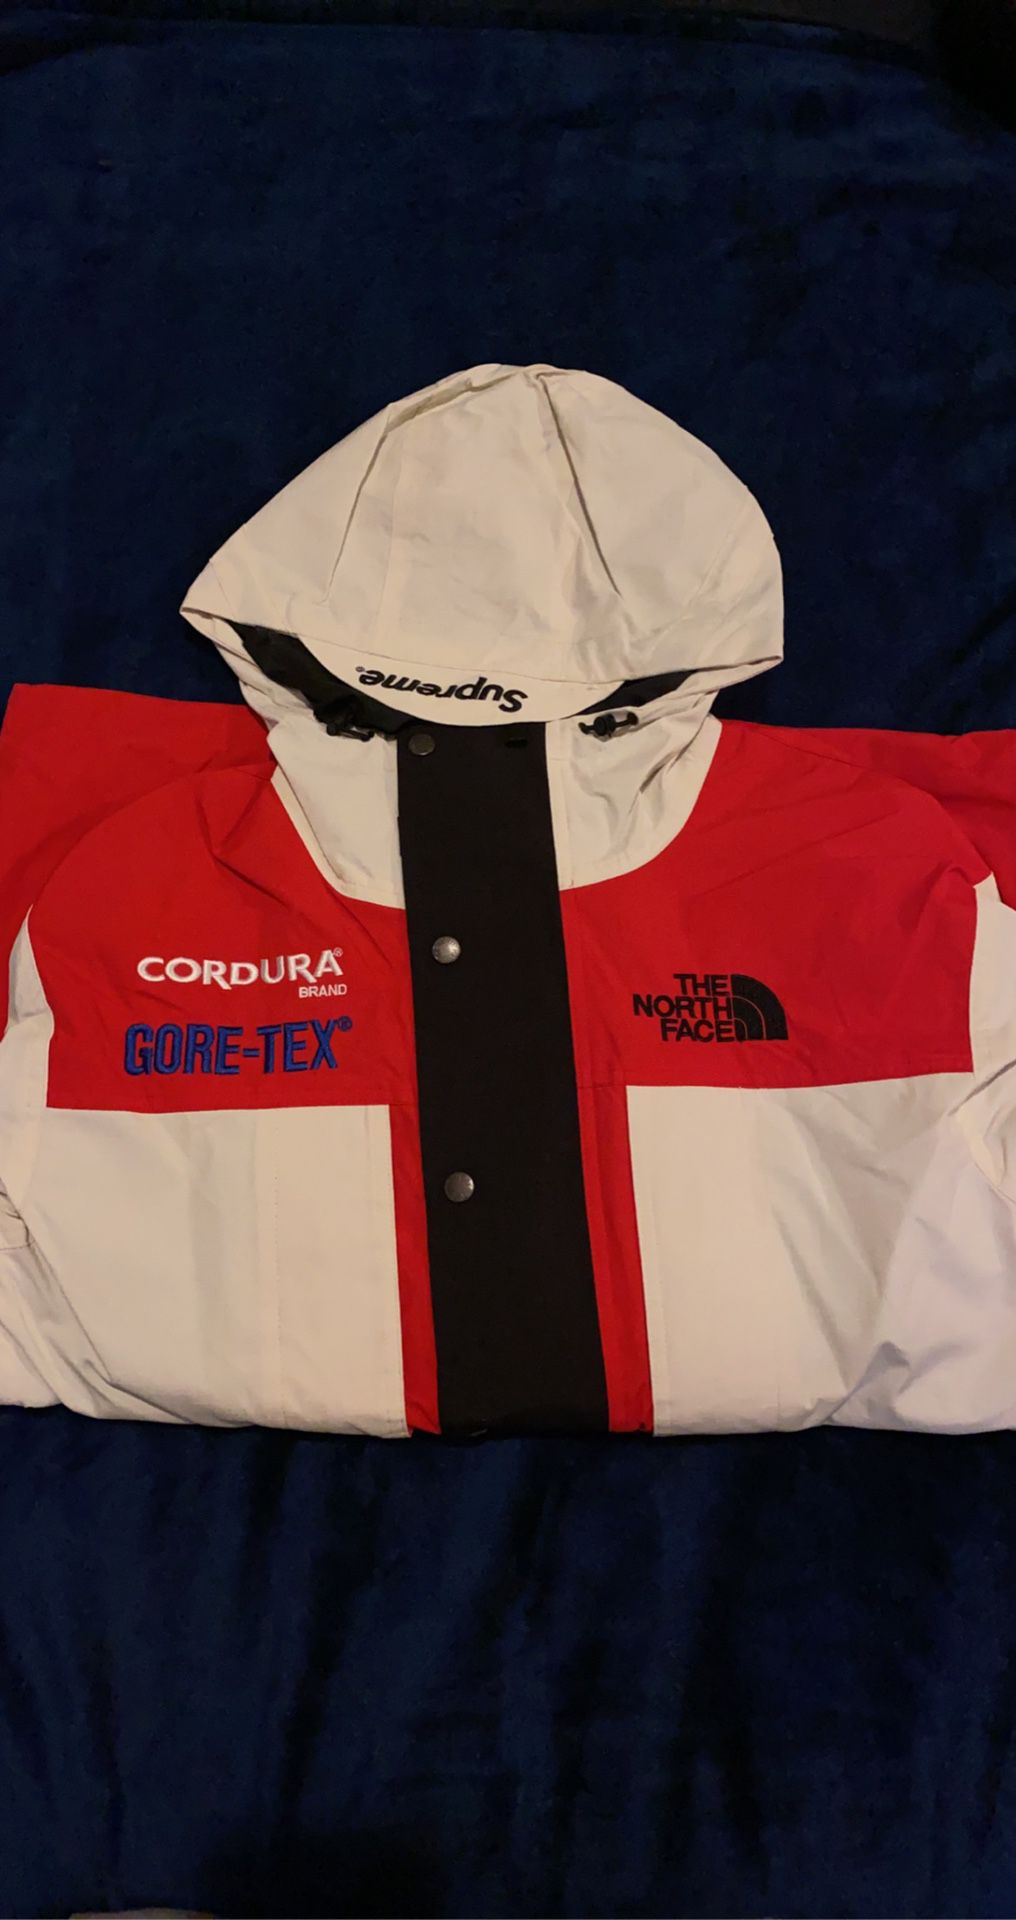 SUPREME x TNF Expedition Jacket, White XL